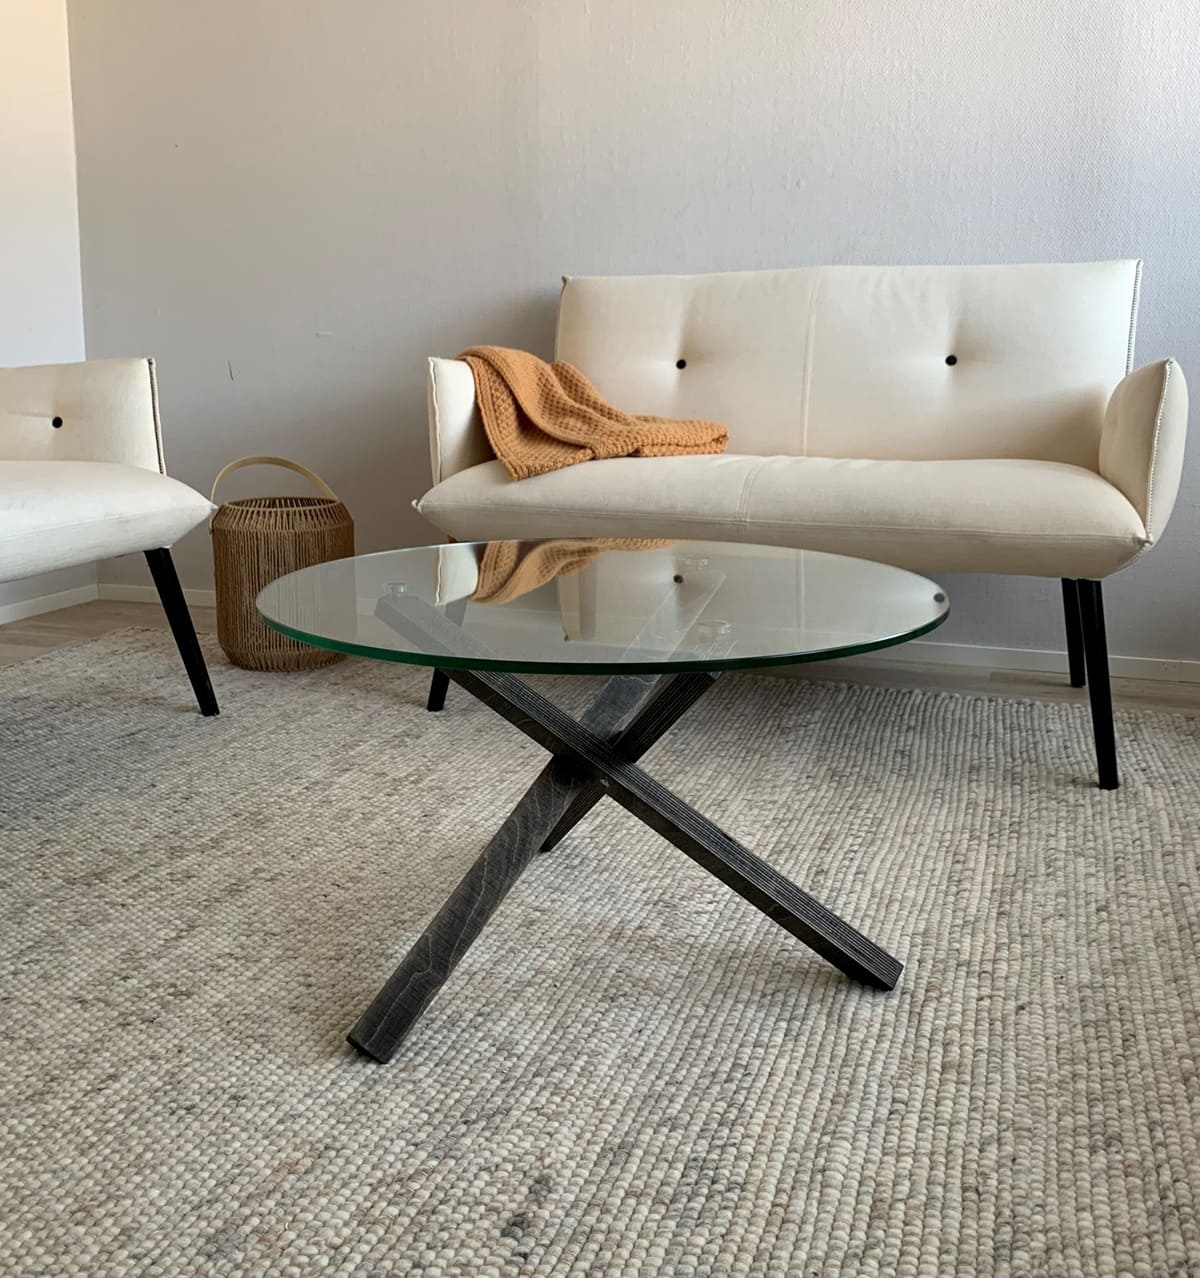 PUNOS coffee table